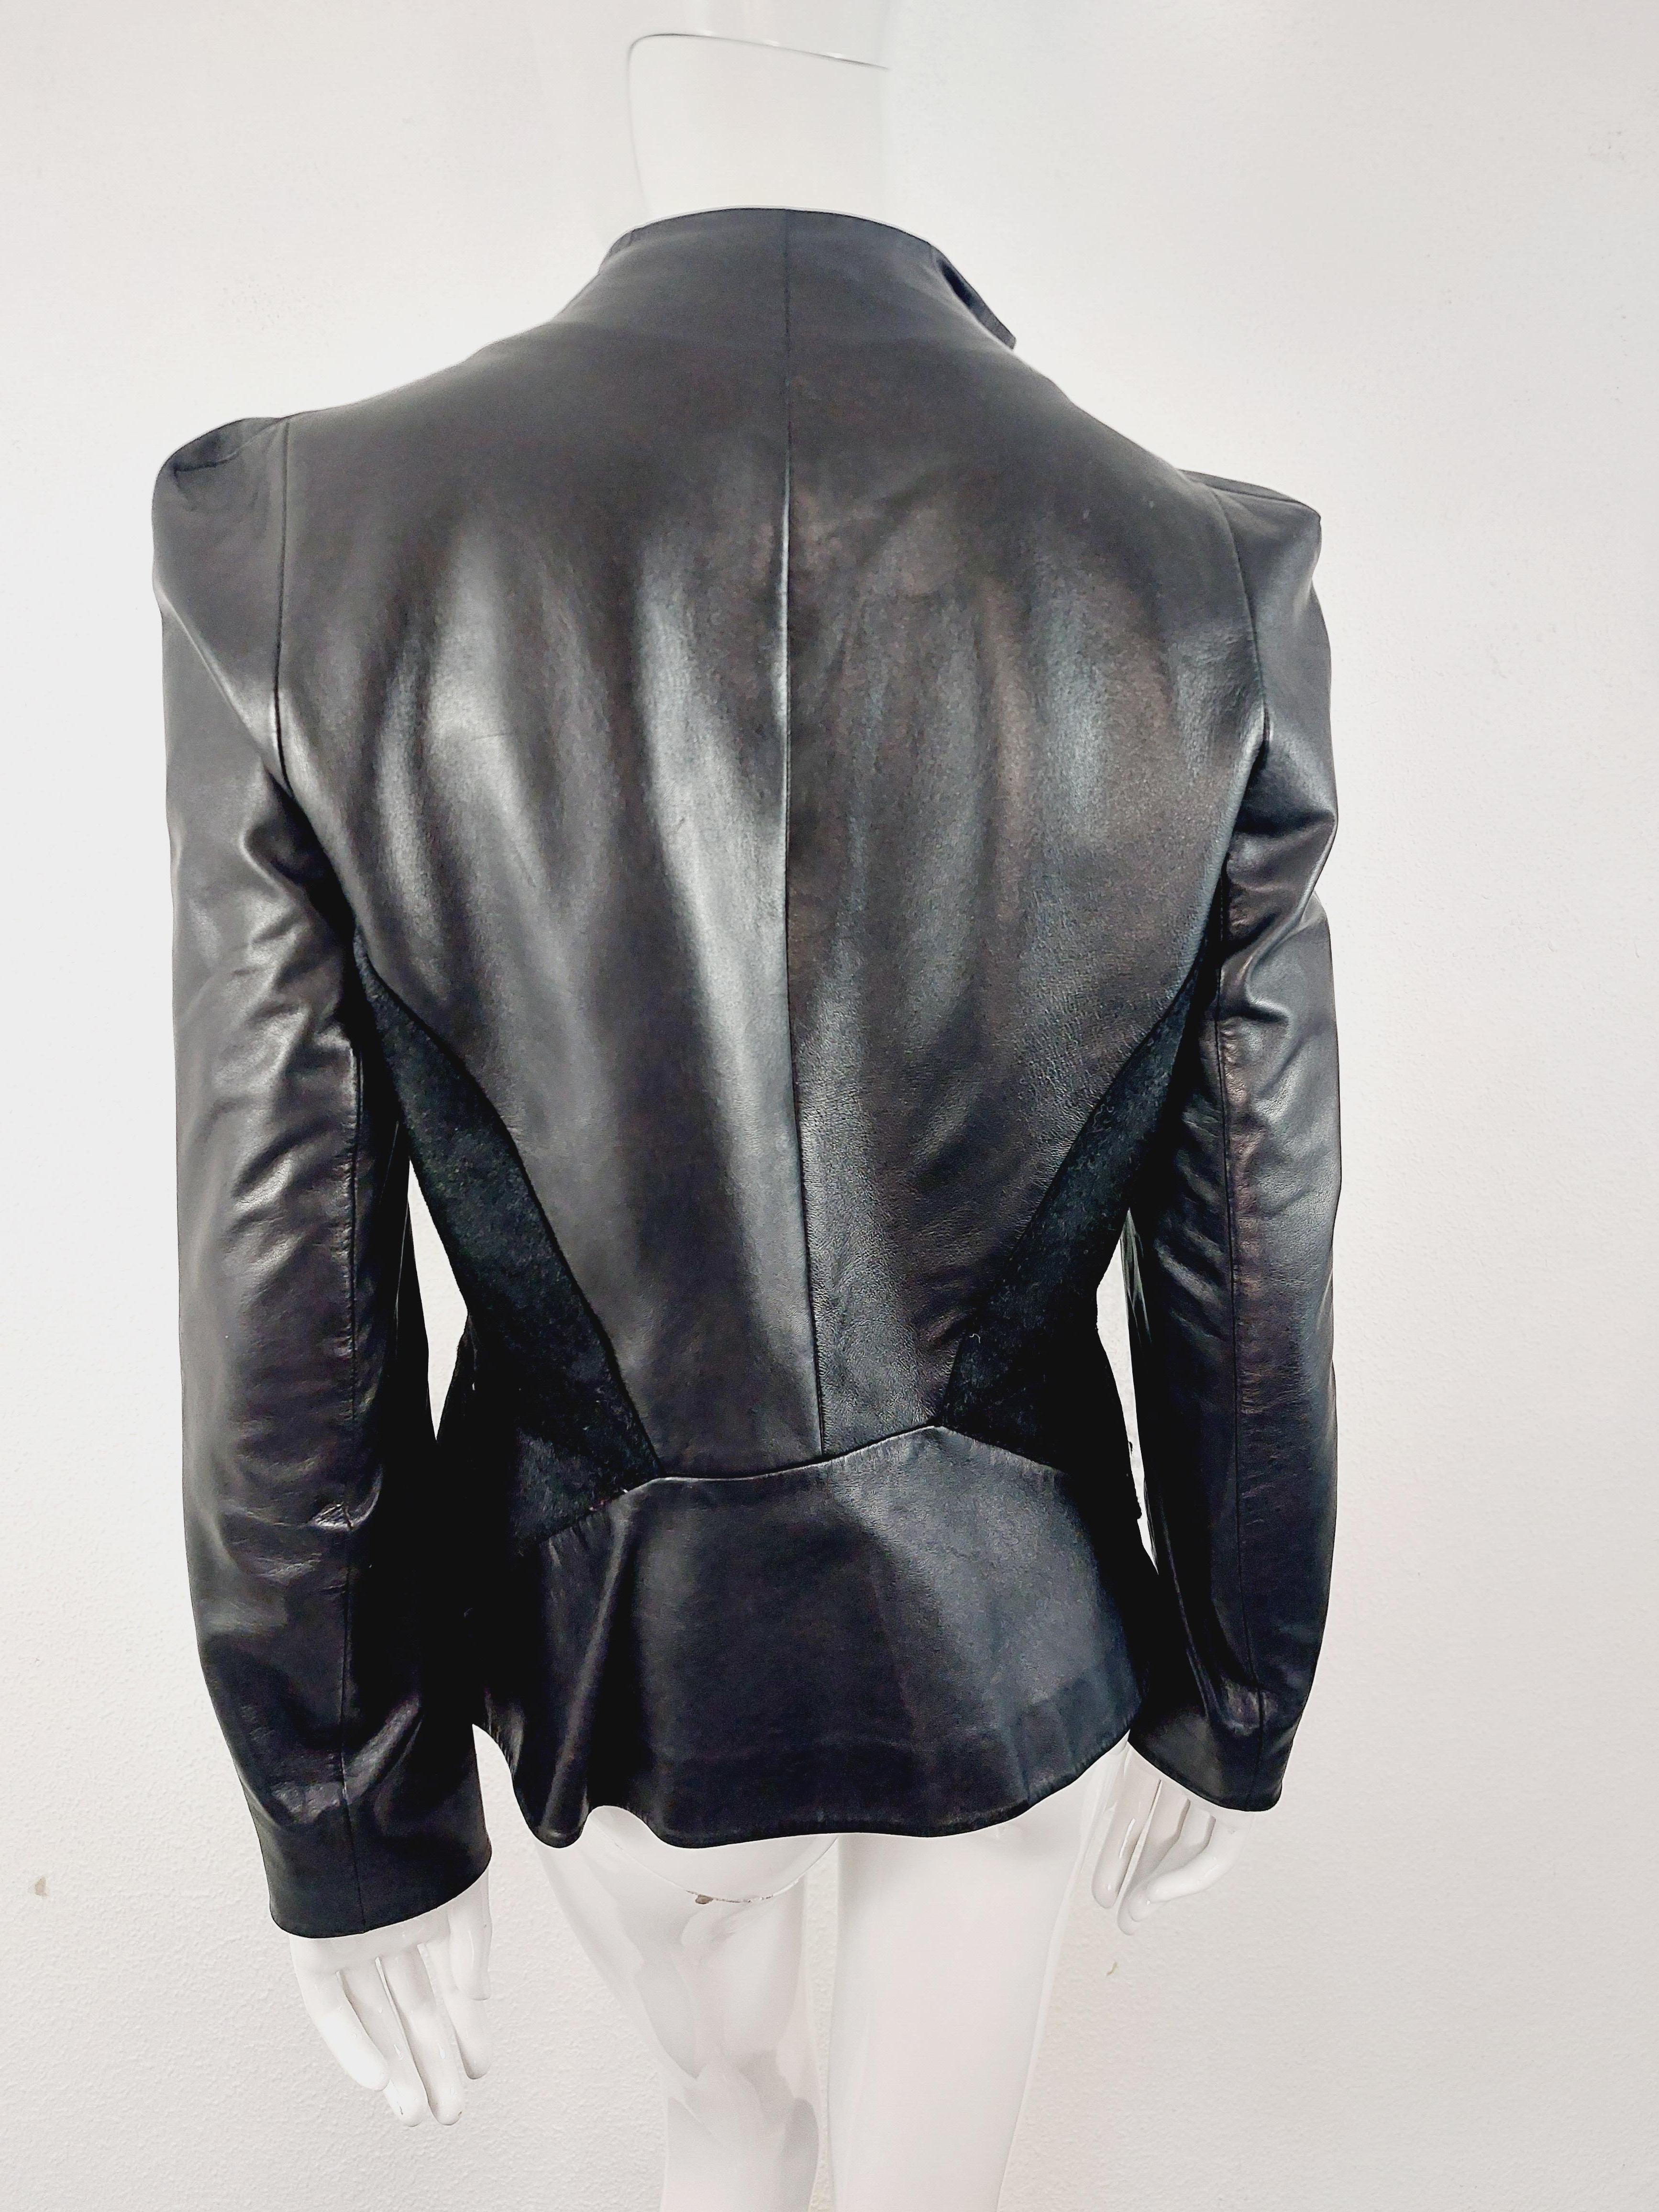 Thierry Mugler Couture Leather Lamb Runway Wasp Waist Motorcycle 90s Black Vintage Black Blazer Jacket Veste 

Rare Leahter jacket by Thierry Mugler!
Lamb leather and silk

VERY GOOD condition! Light minimal scratches on the metal closure.

SIZE: 42